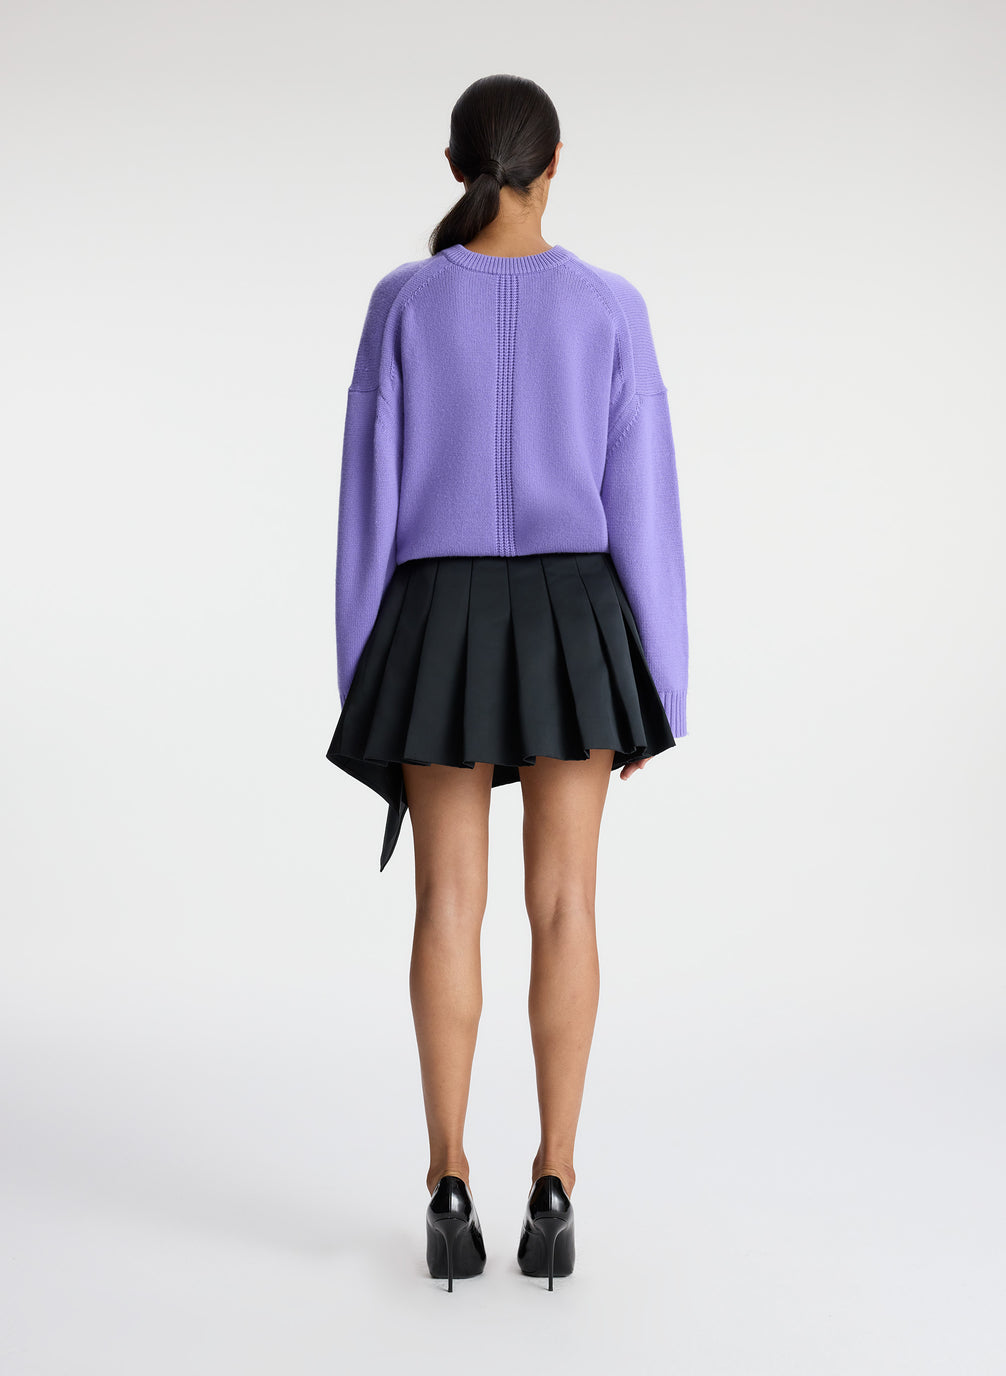 back view of woman wearing purple sweater and black pleated mini skirt